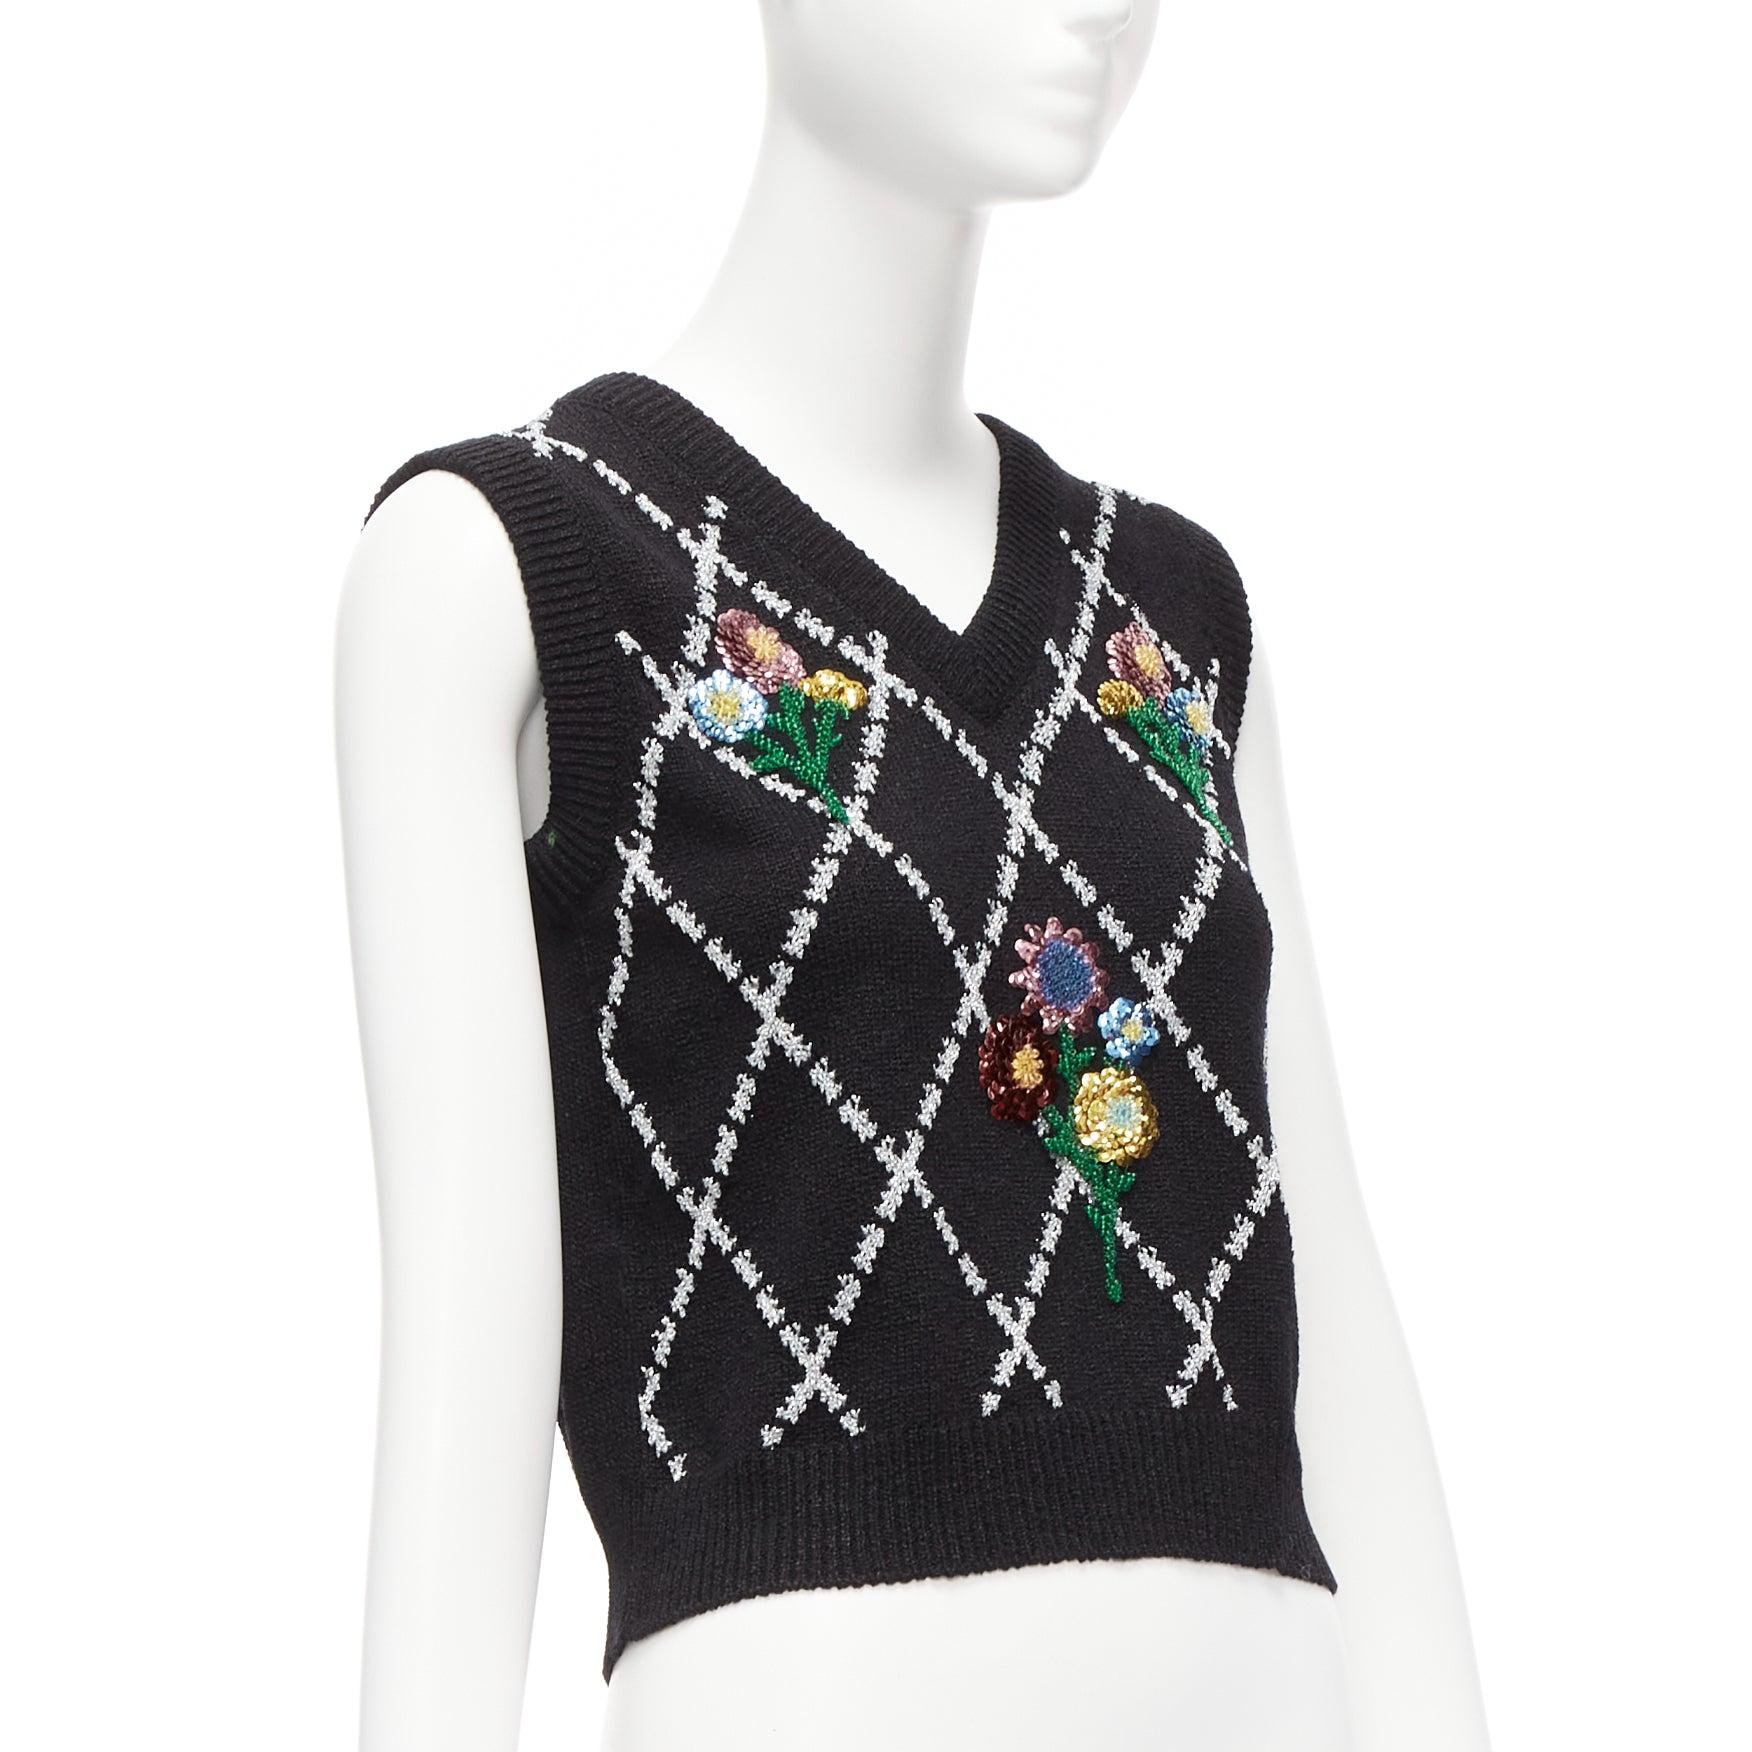 GUCCI black silver diamong argyle floral embellished sweater vest S
Reference: AAWC/A00610
Brand: Gucci
Designer: Alessandro Michele
Material: Viscose, Blend
Color: Black, Silver
Pattern: Floral
Extra Details: Sequins and bead floral embellishment.